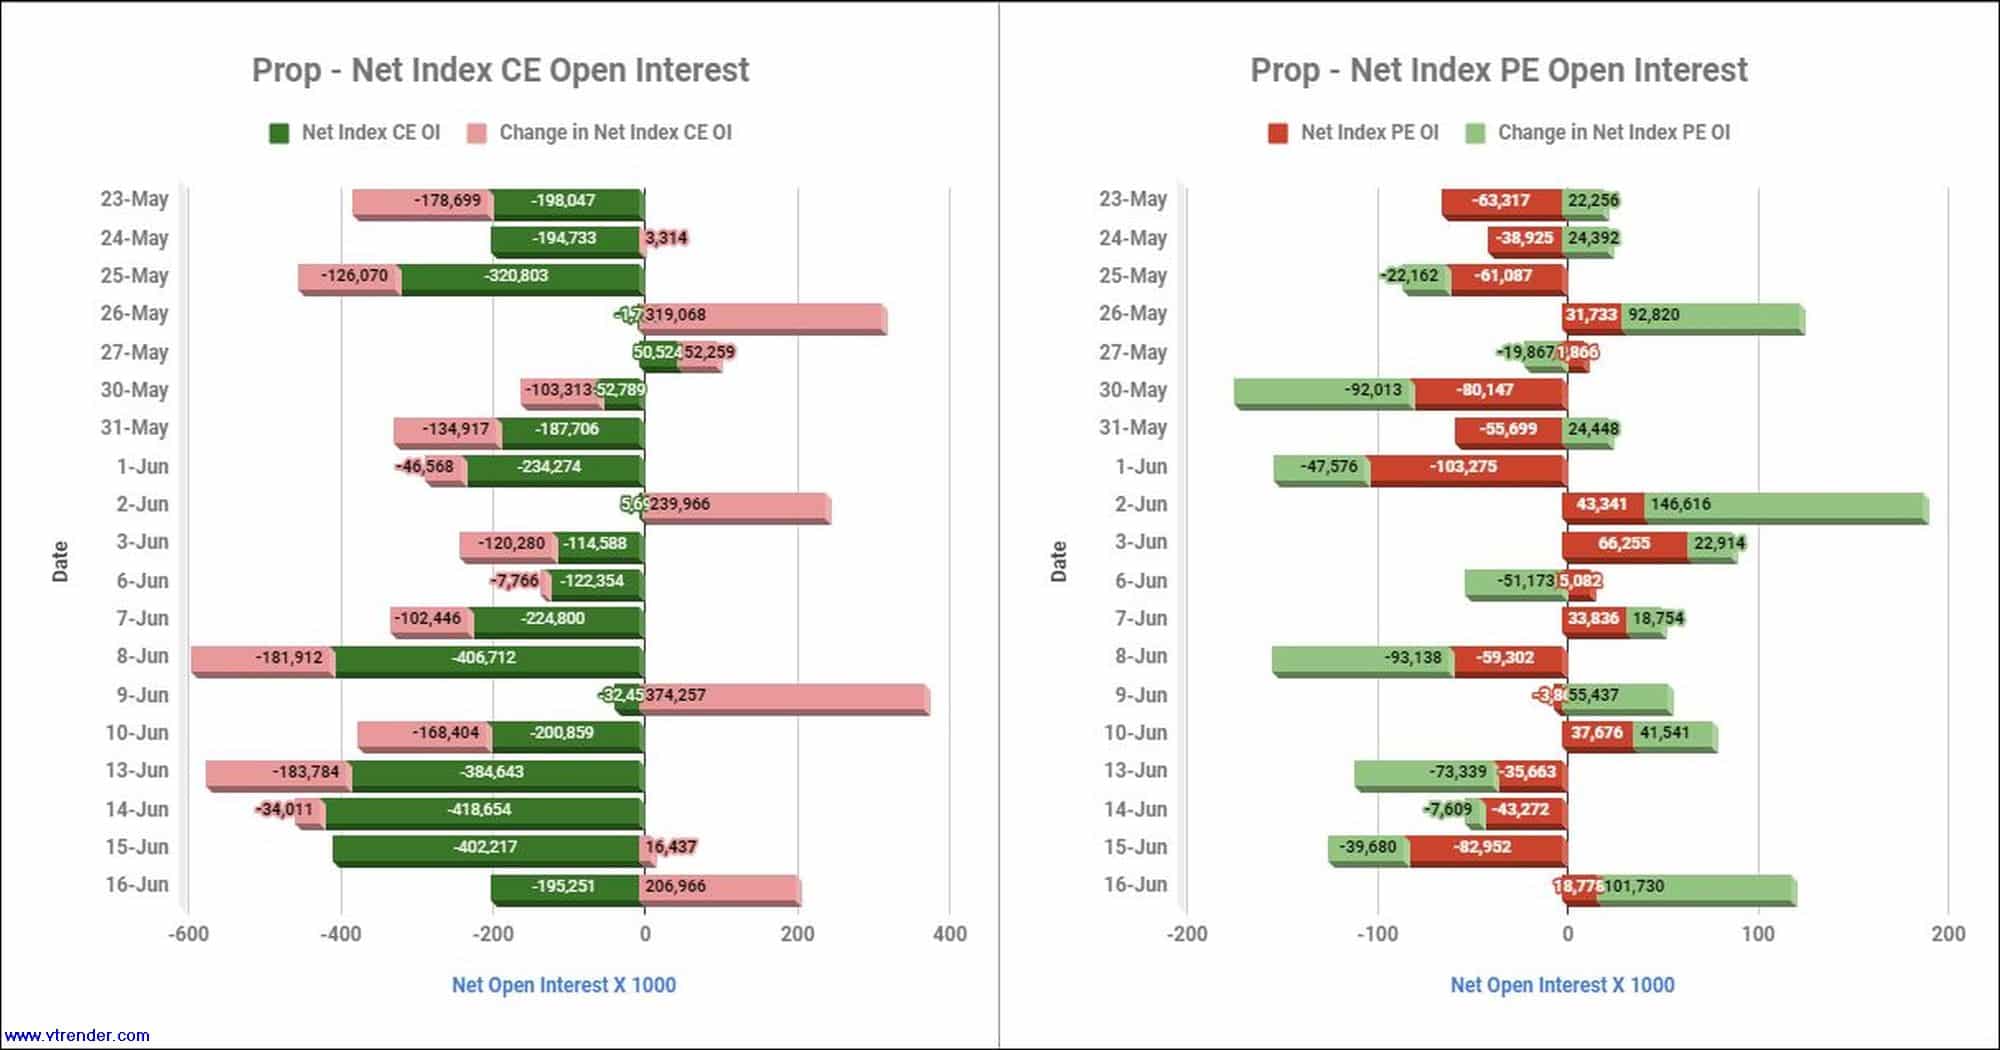 Proinop16Jun Participantwise Net Open Interest And Net Equity Investments – 16Th Jun 2022 Client, Equity, Fii, Index Futures, Index Options, Open Interest, Prop